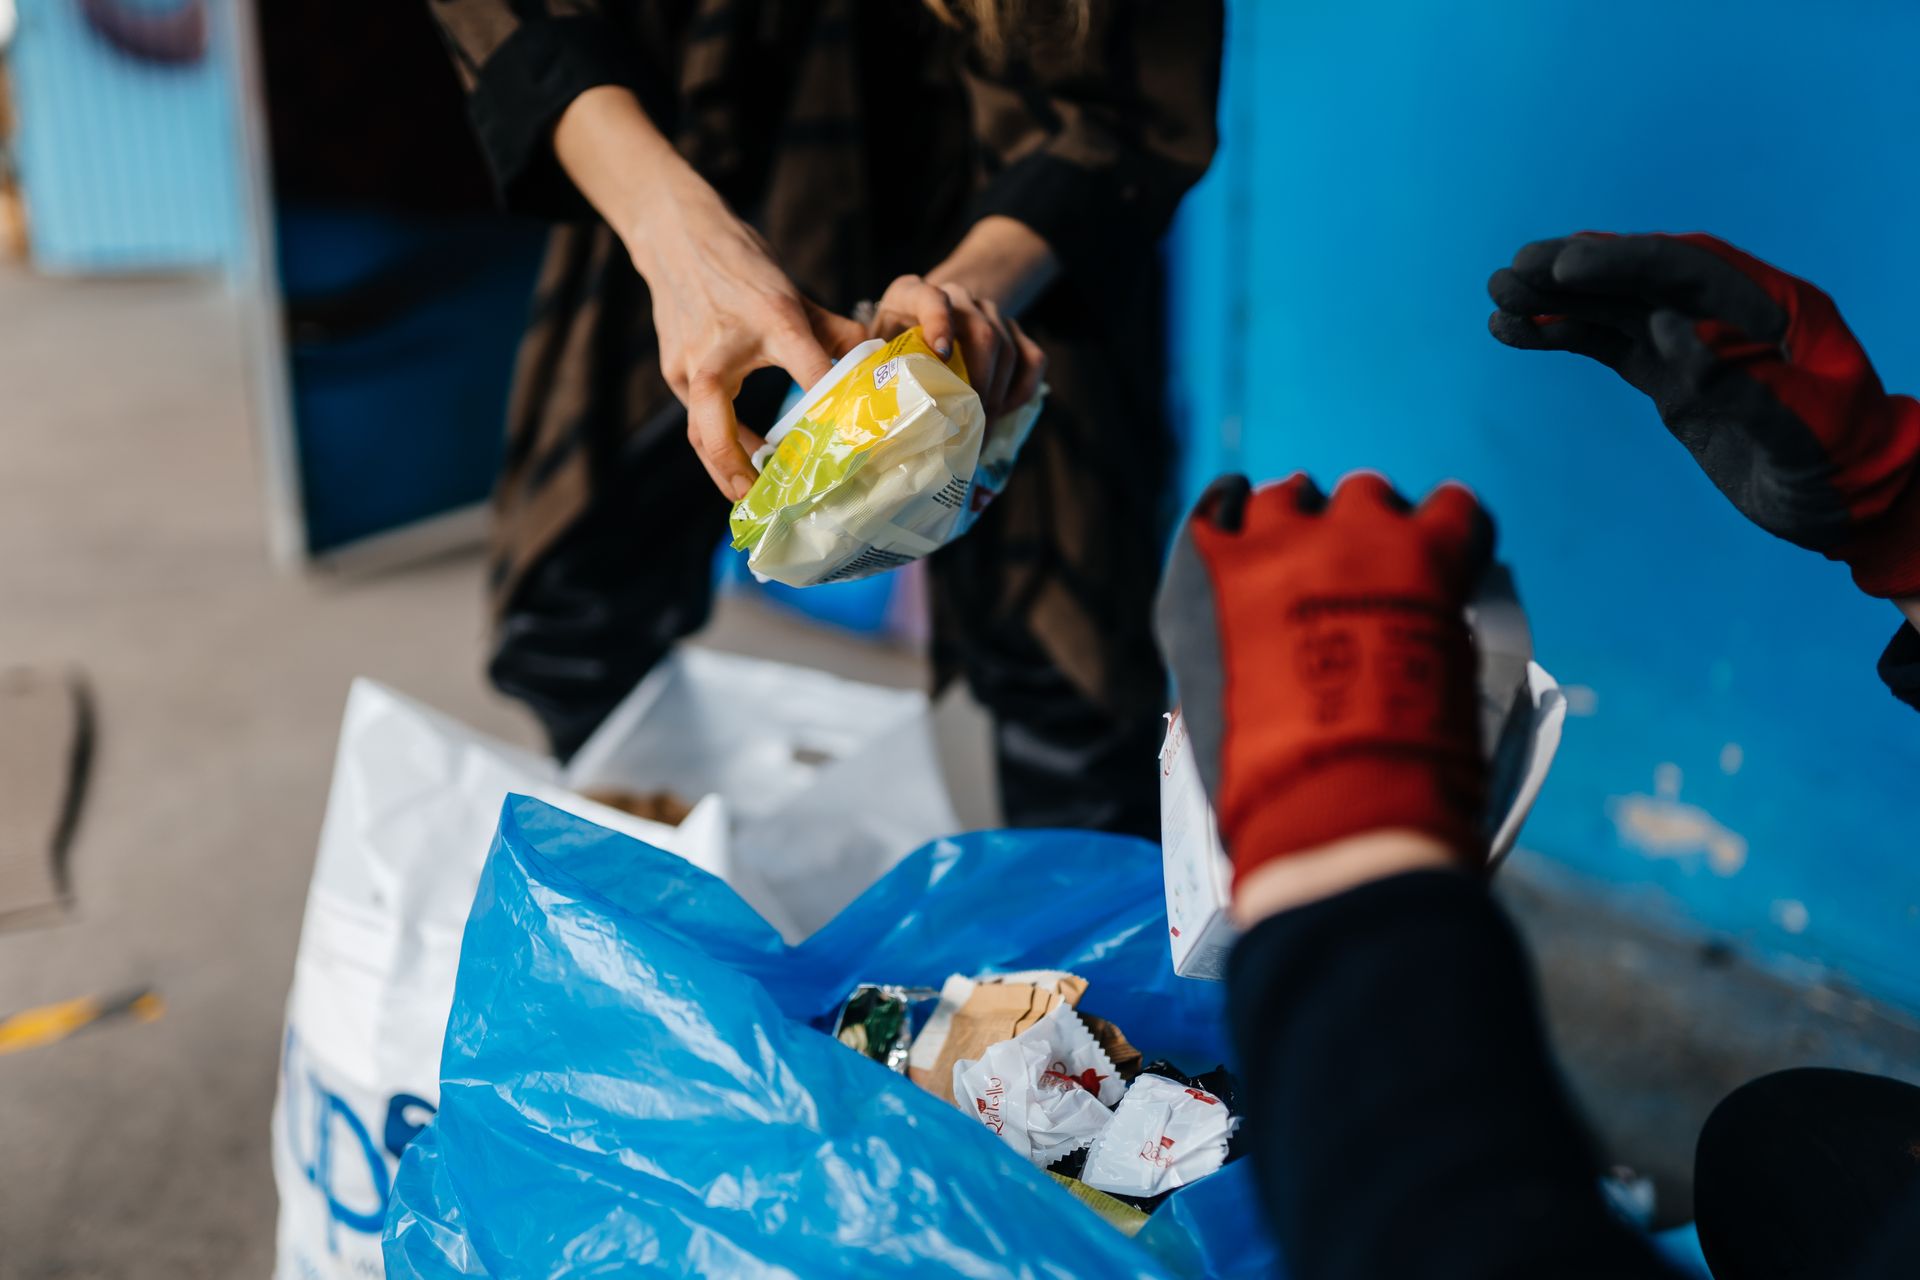 A person wearing red gloves is putting a bag of food into a blue bag